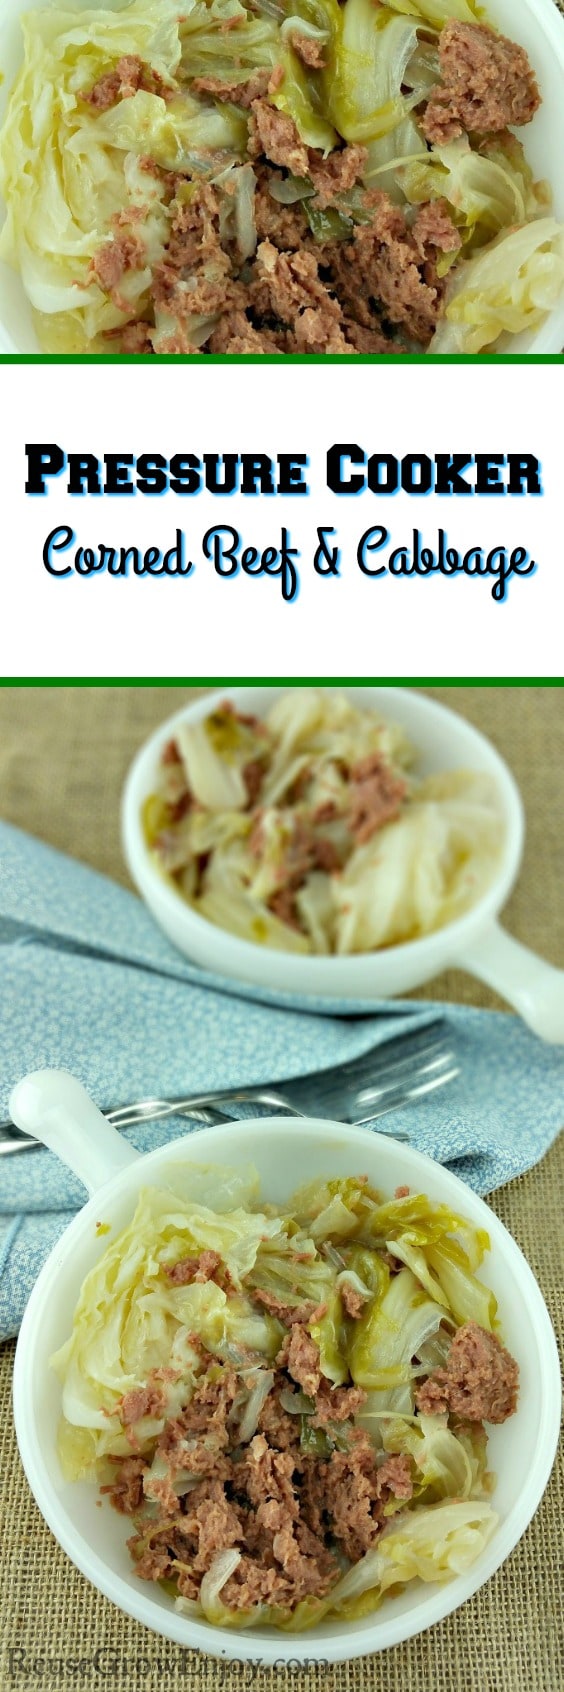 Looking for a good and easy corned beef and cabbage recipe? Check out my Pressure Cooker Corned Beef and Cabbage Recipe! It is super easy to make and oh so good!